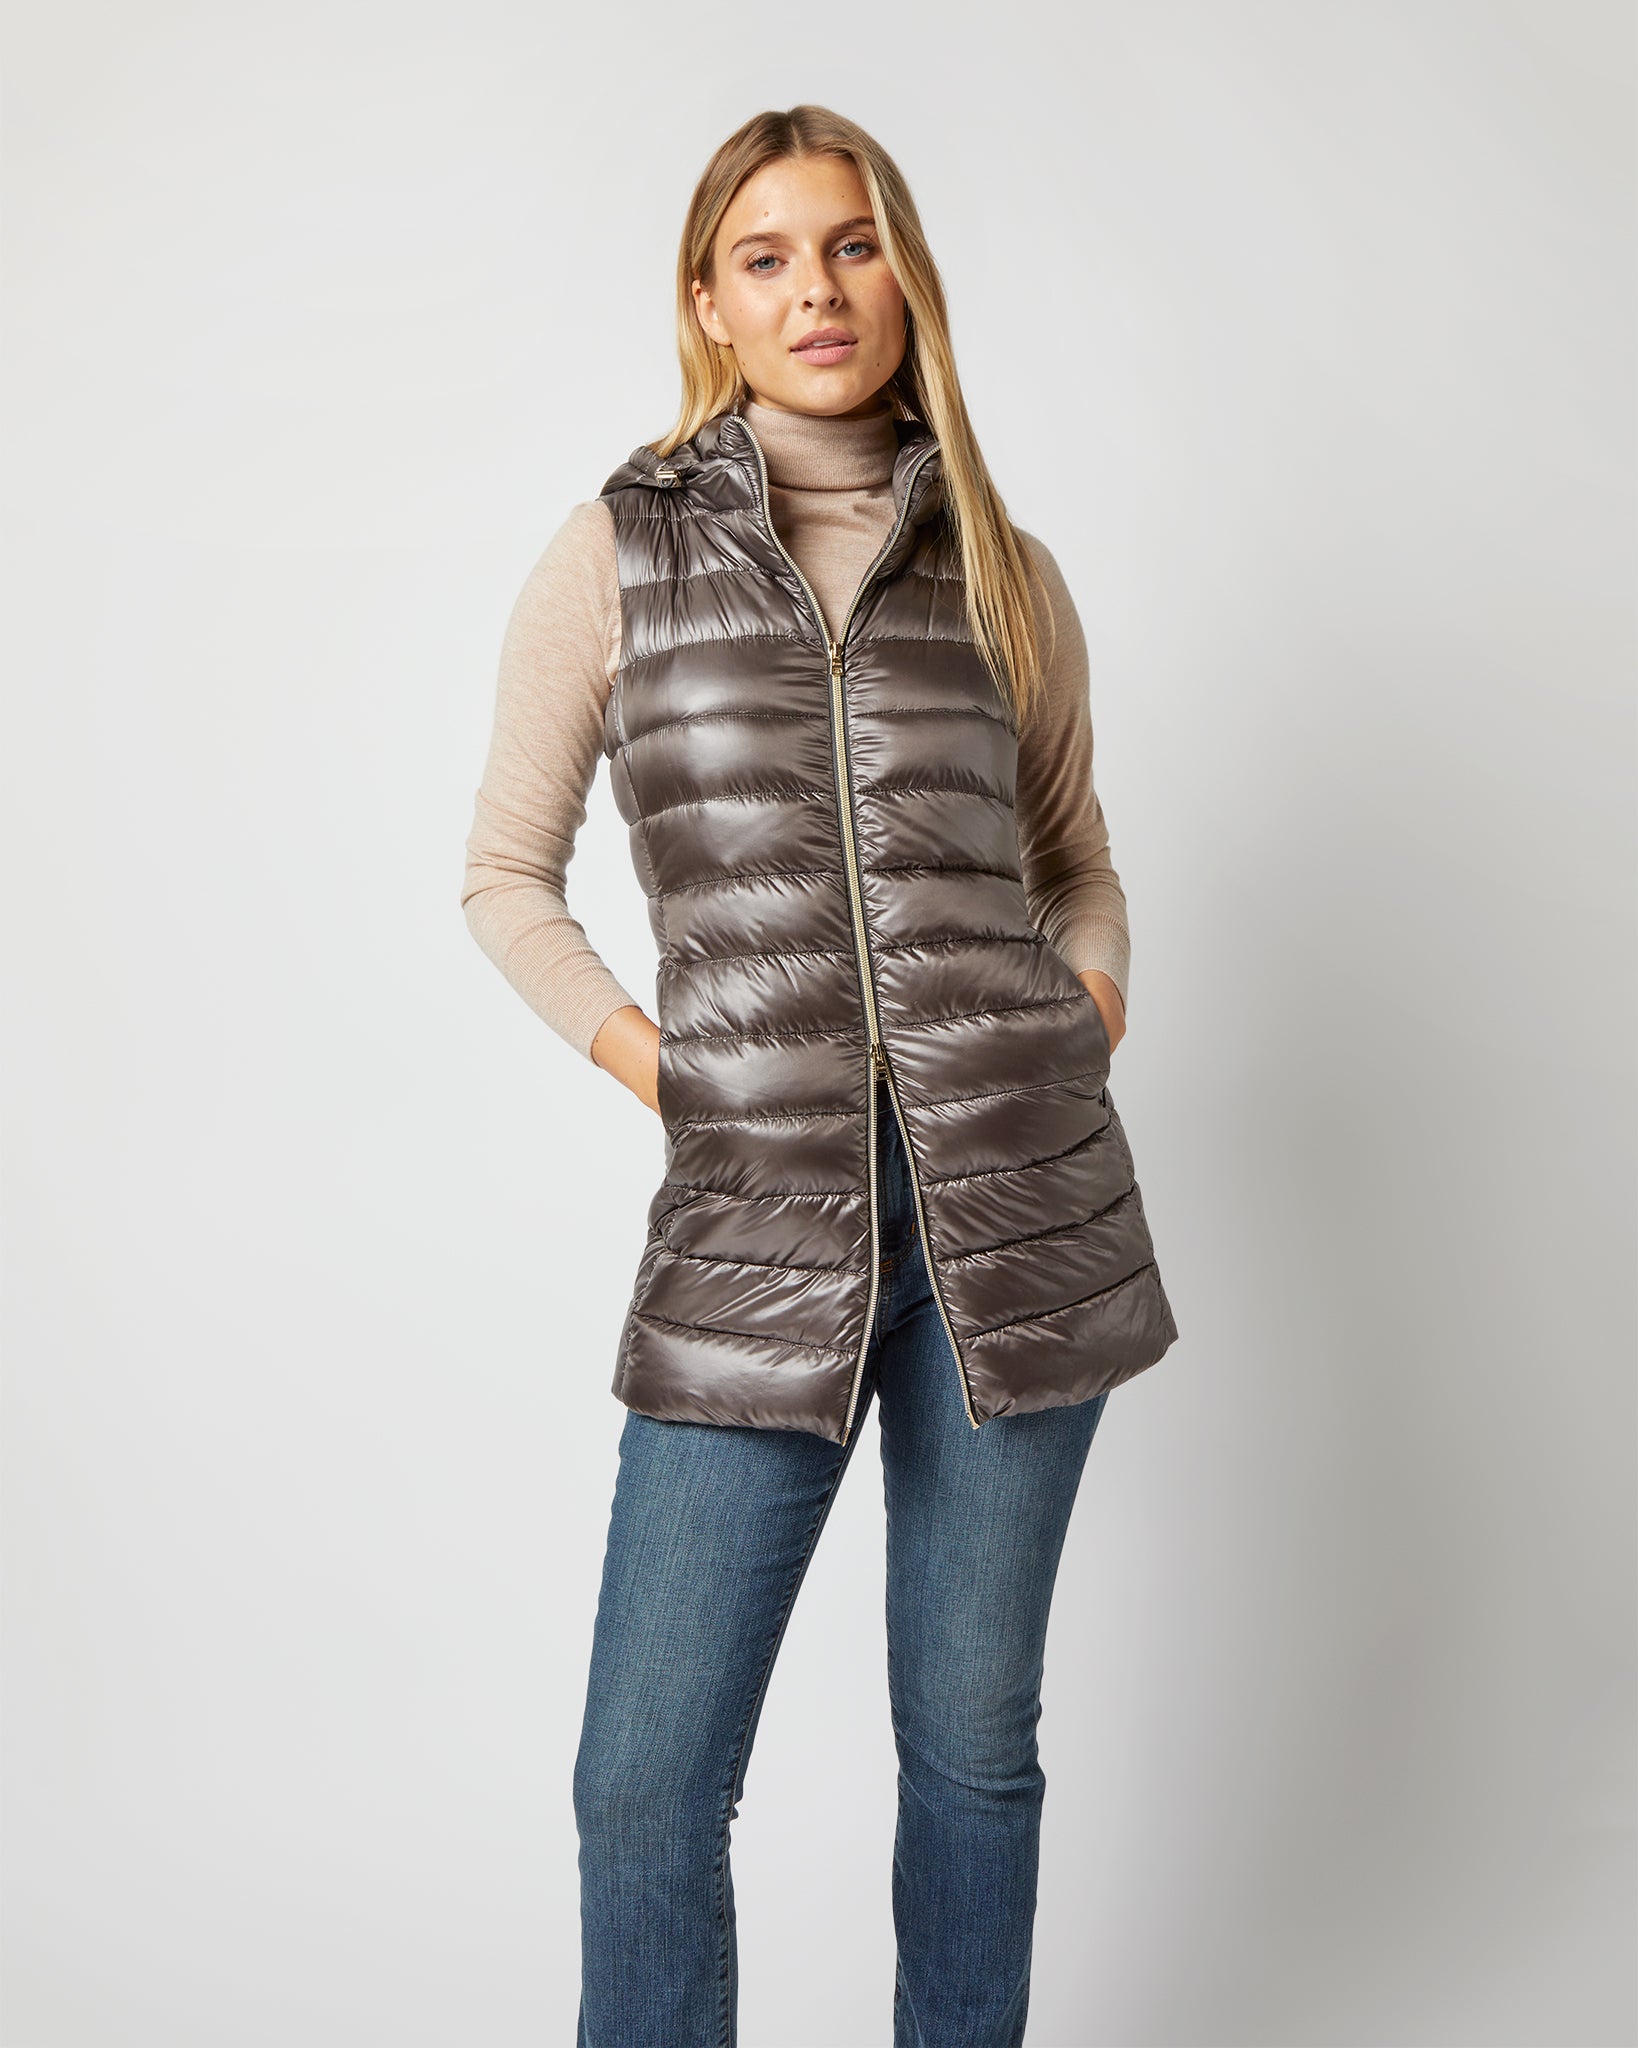 Serena Fitted Long Vest in Charcoal